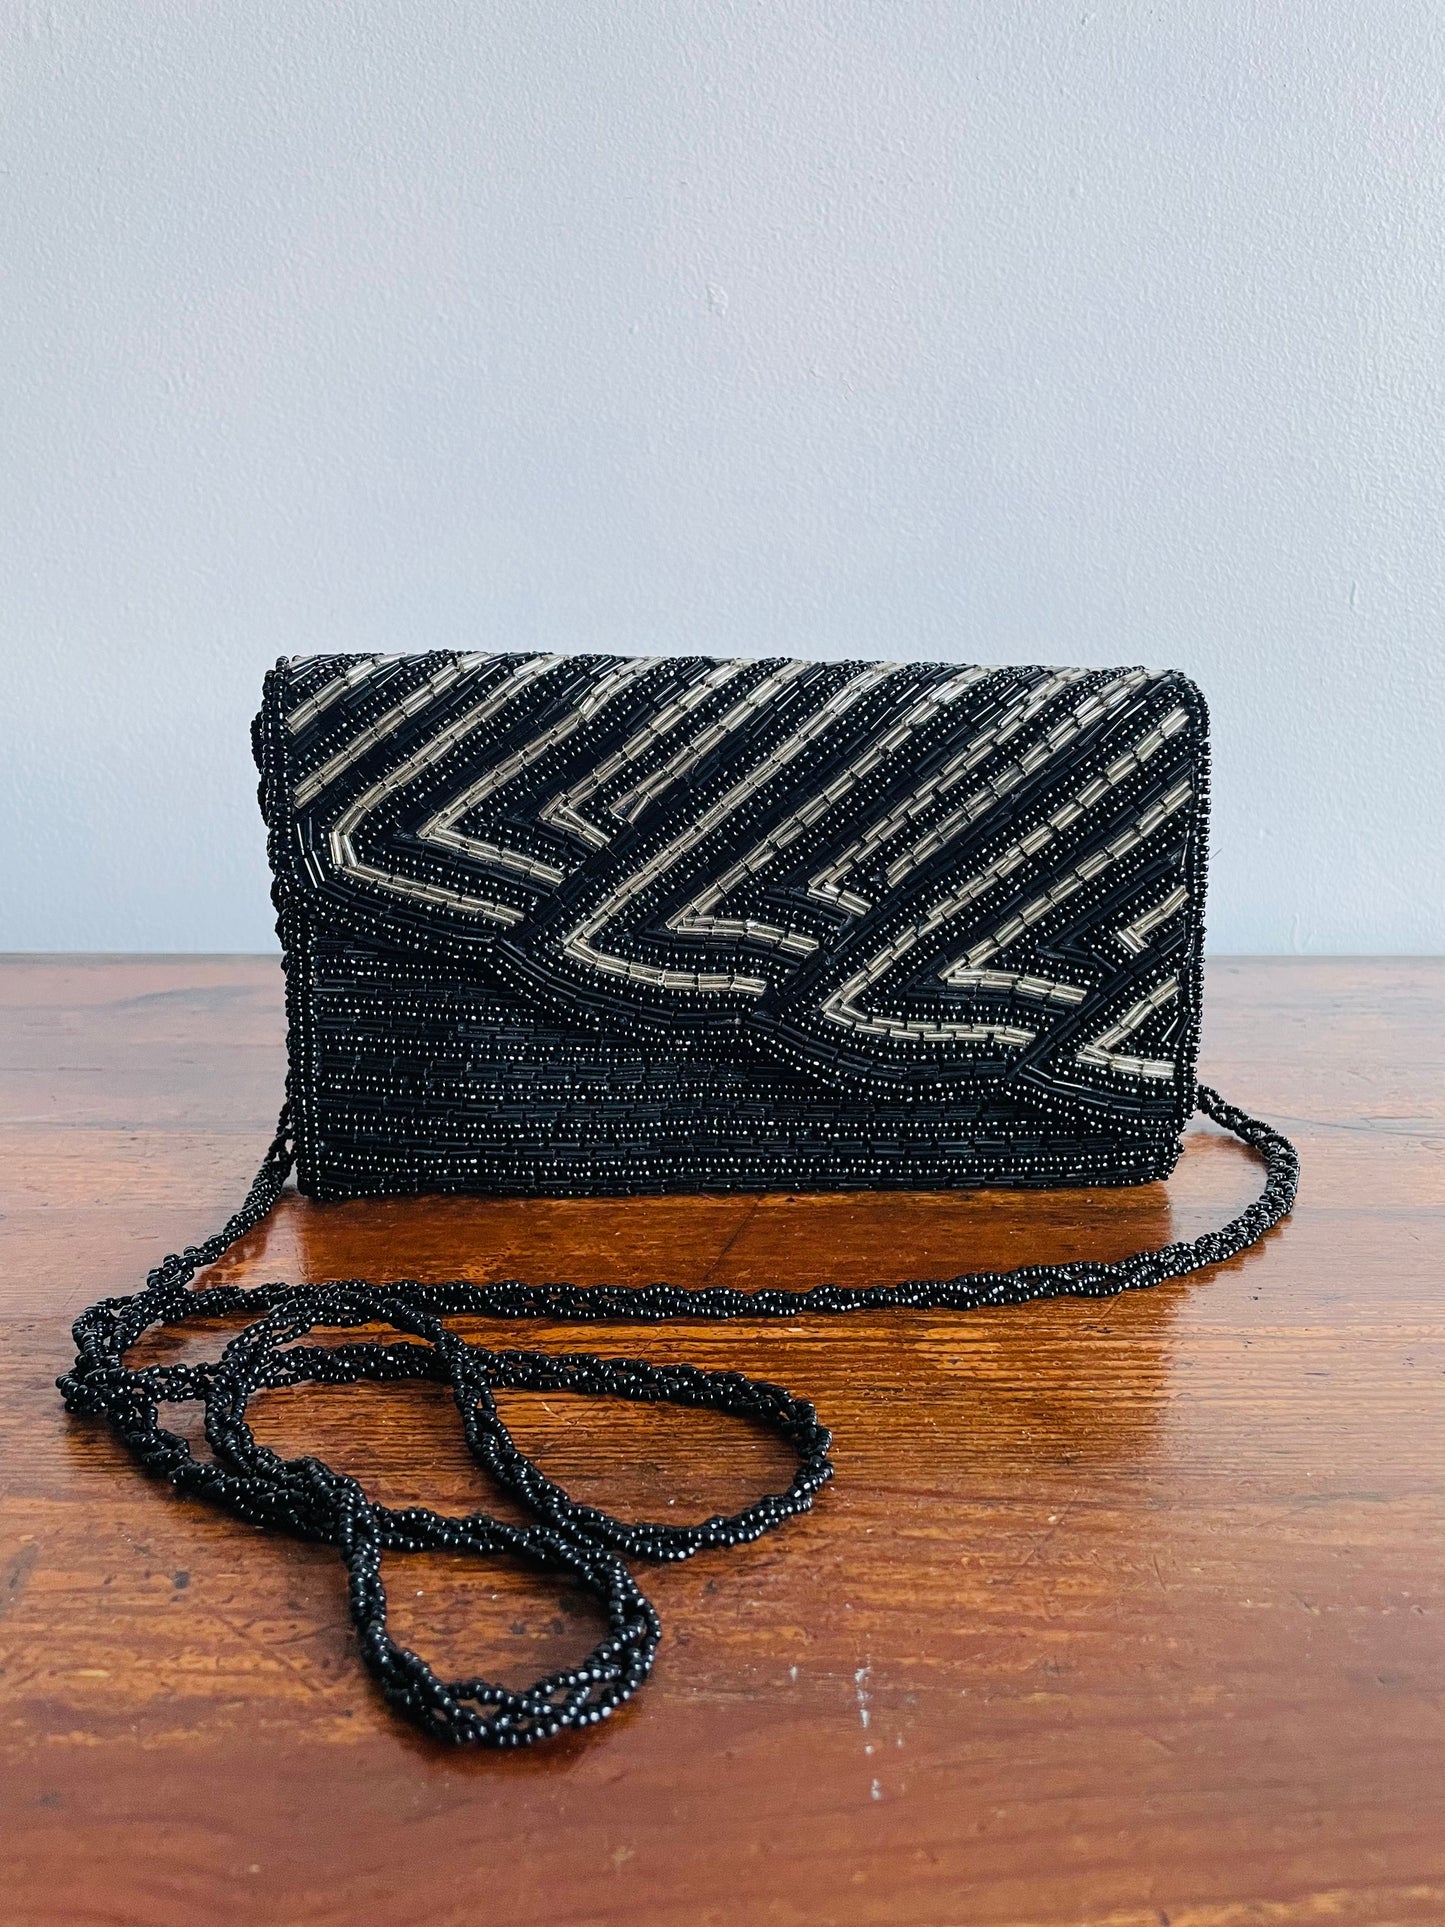 Gorgeous Black & Silver Beaded Clutch Purse with Braided Bead Shoulder Strap